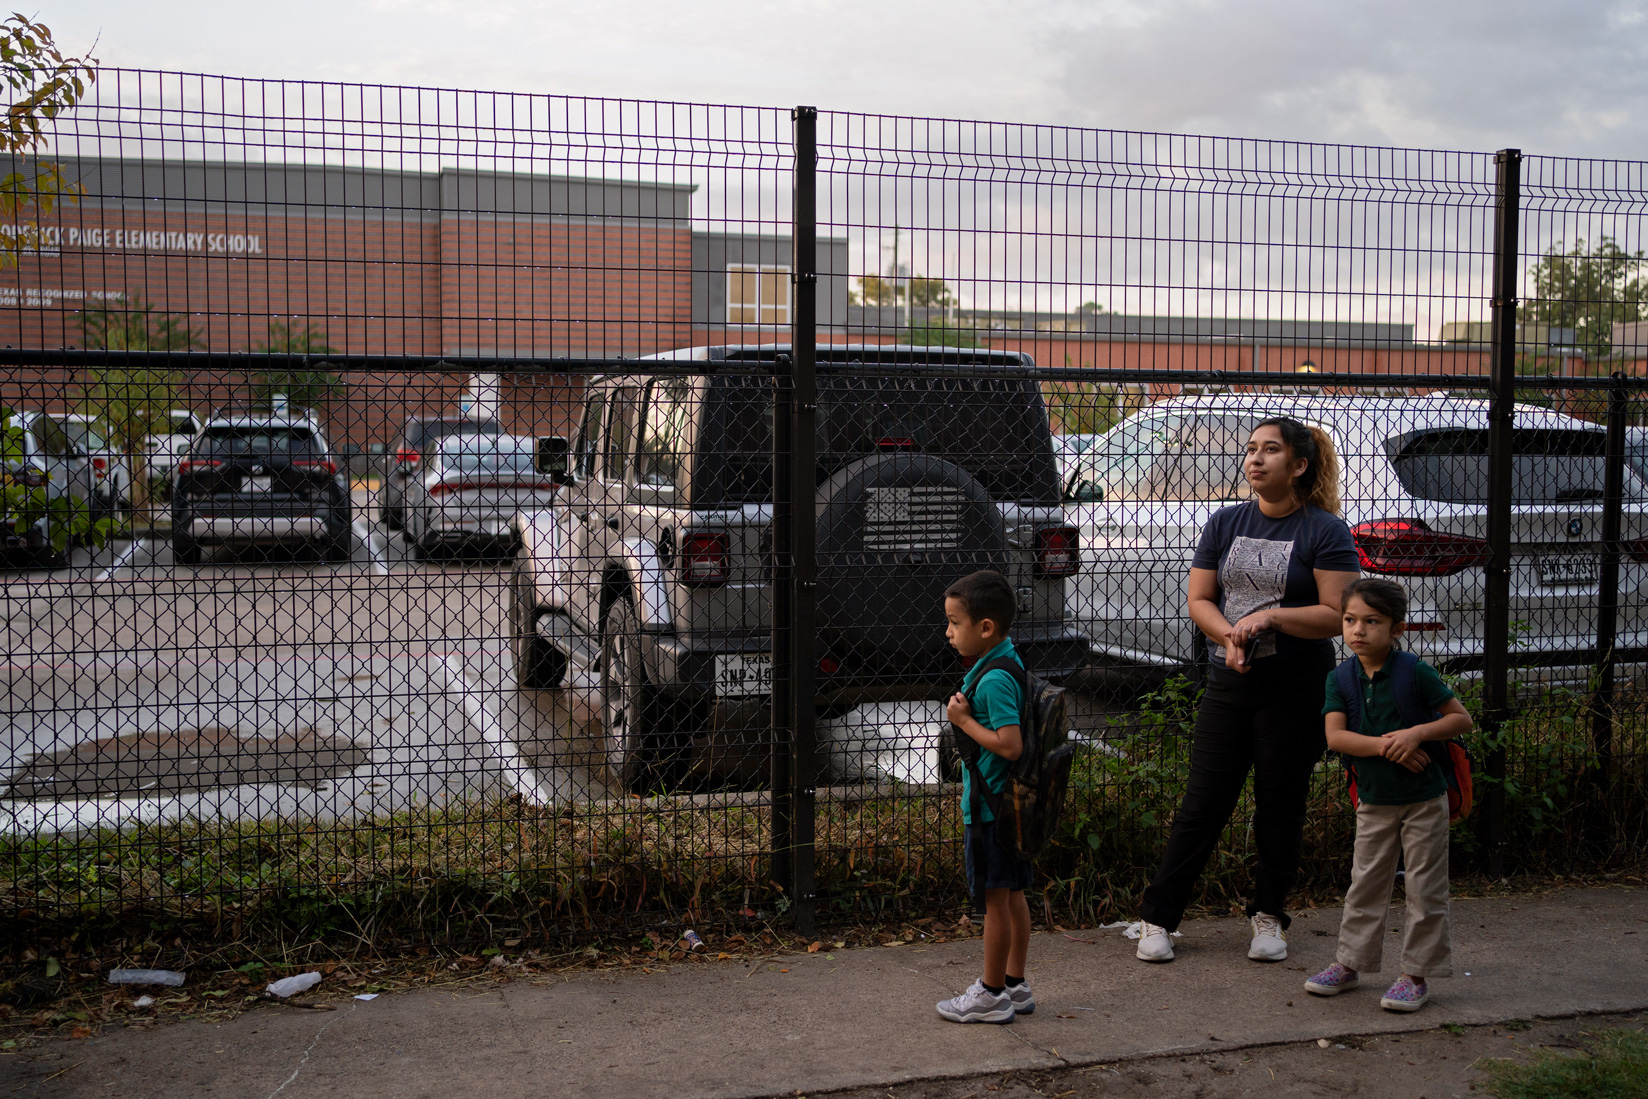 Vivian Alexander waits with her children for her son before walking them to school next door at Roderick Paige Elementary, October 20, 2023, in Houston.